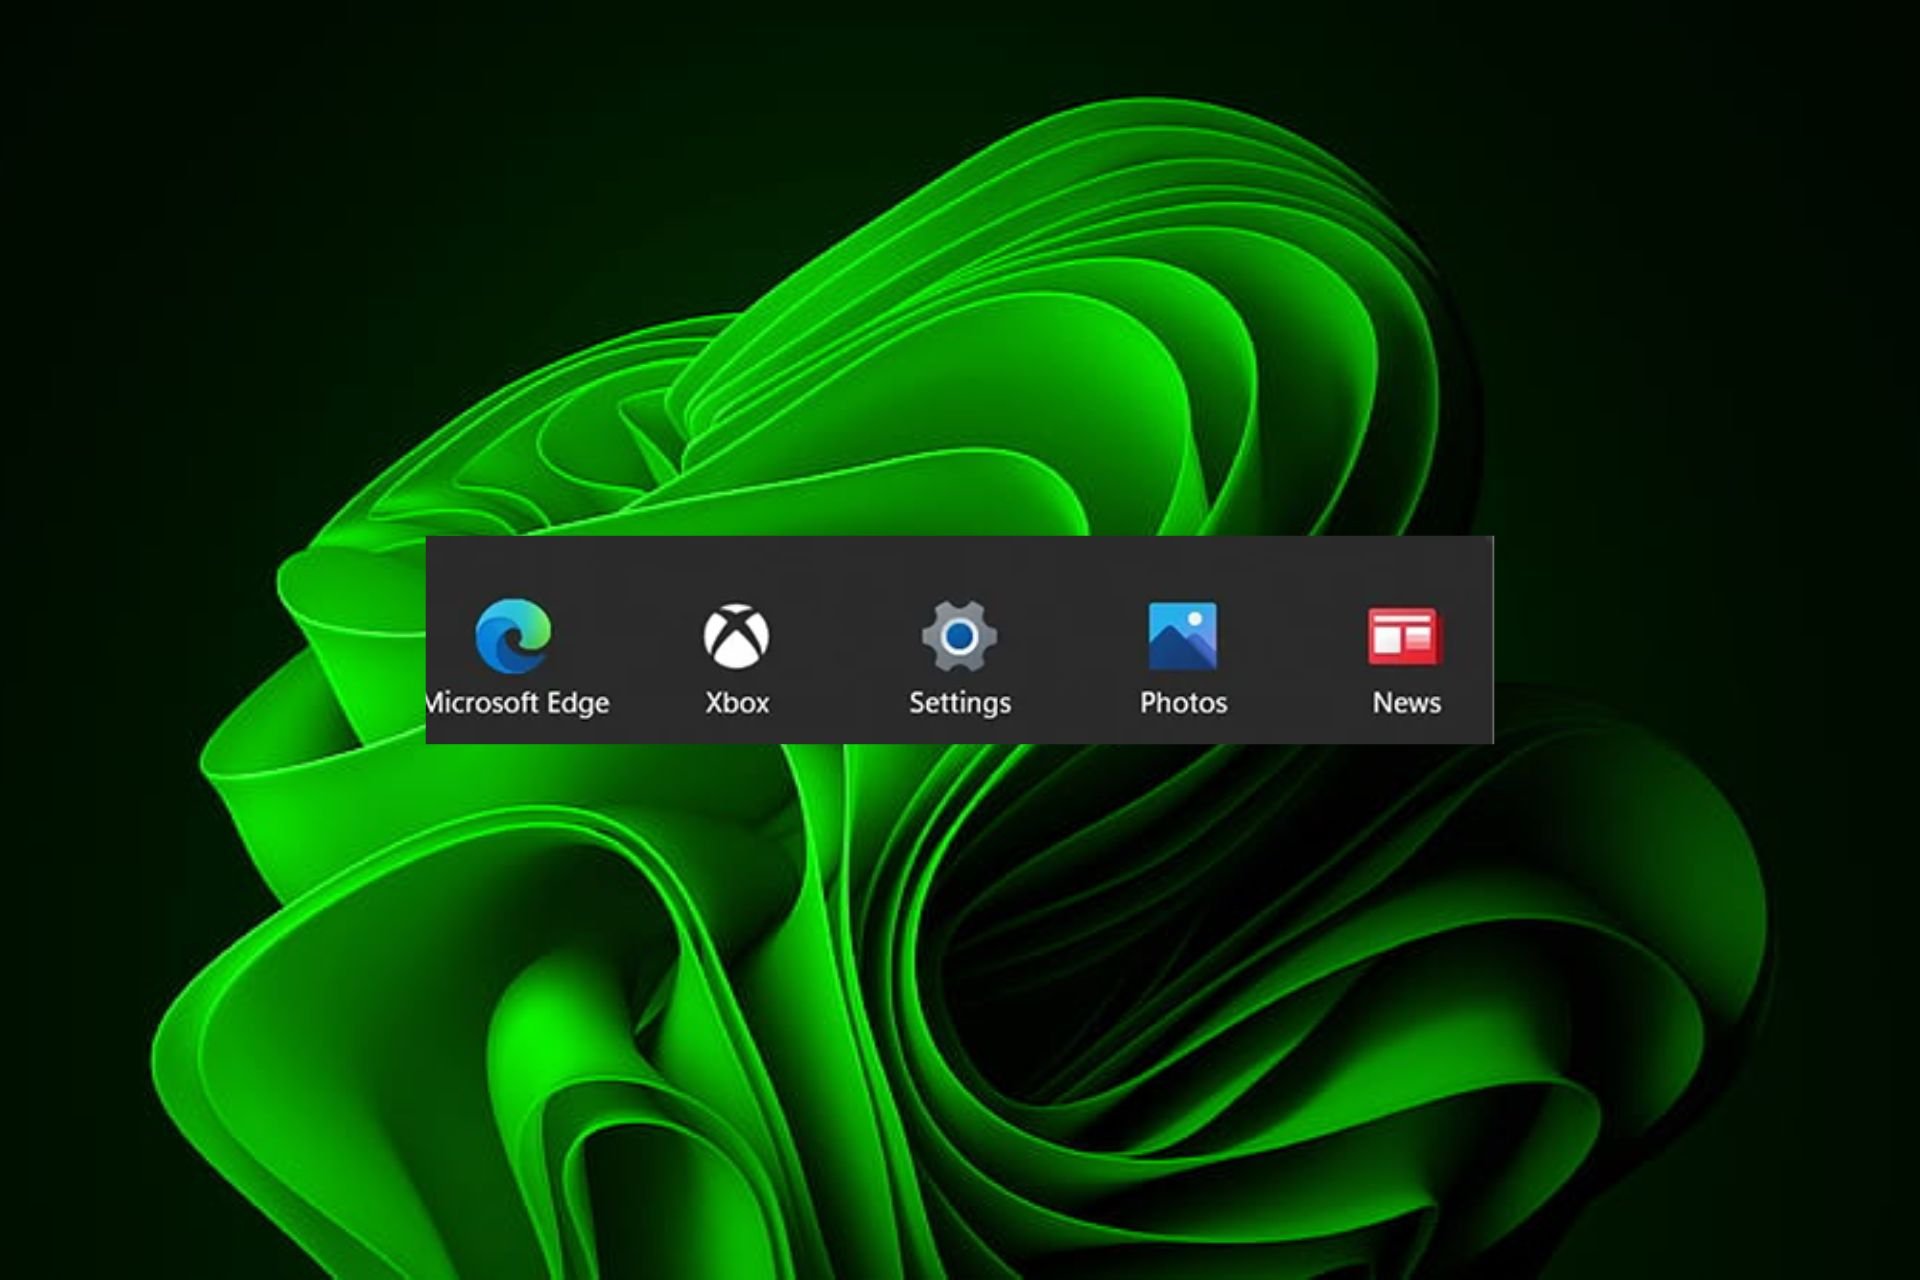 How to Stop the Xbox App if it Keeps Pinning Itself on the Taskbar